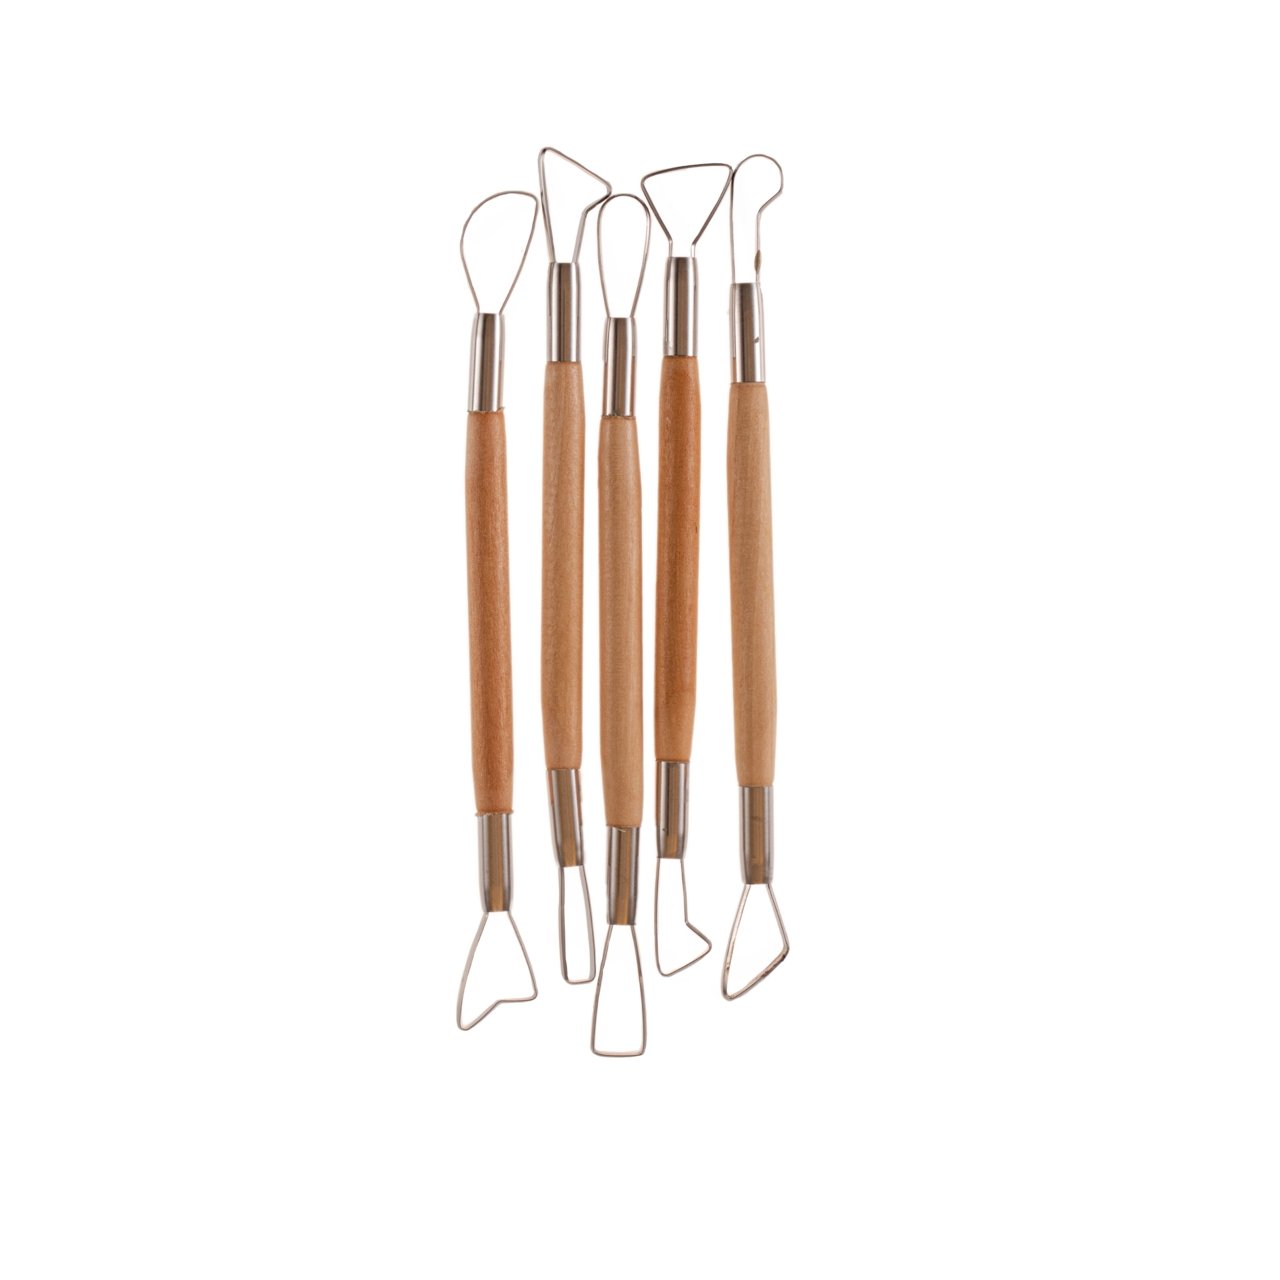 Double-Ended Ribbon Sculpting Tool - 5 Piece Set - merriartist.com